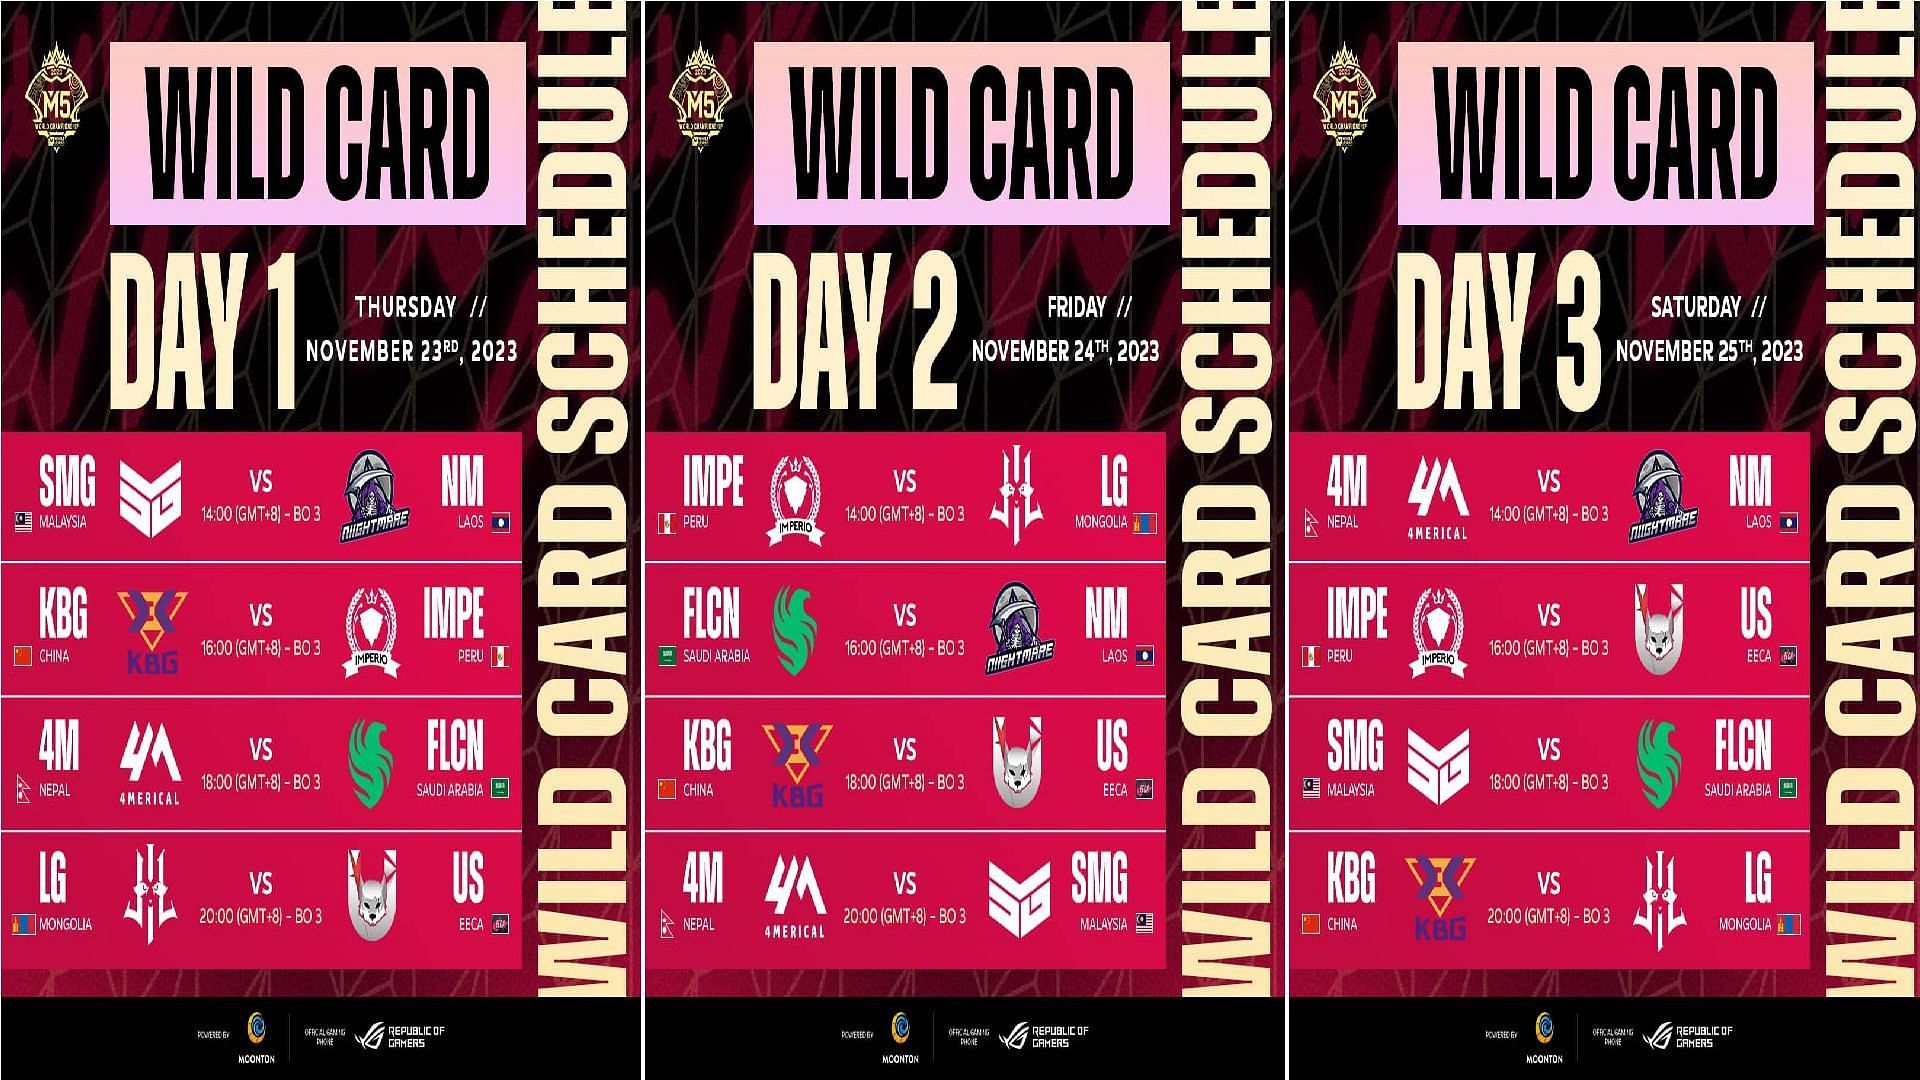 Check out the schedule of M5 Wild Card in Malaysia (Images via Moonton Games and Sportskeeda)